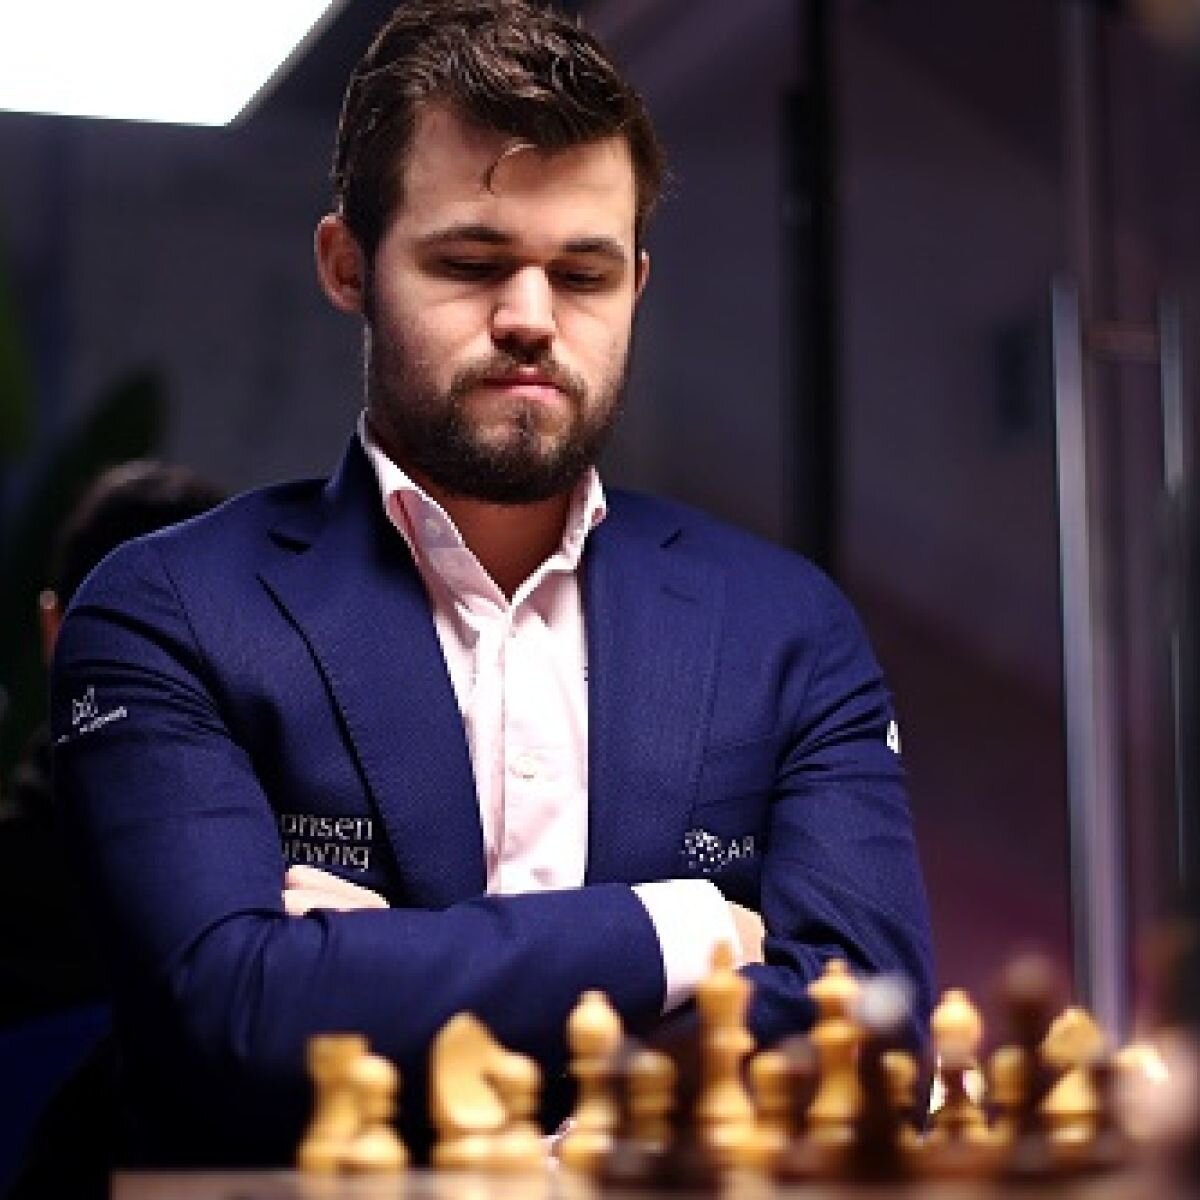 Magnus Carlsen loses thanks to dramatic mouse slip in last competition as  world champion